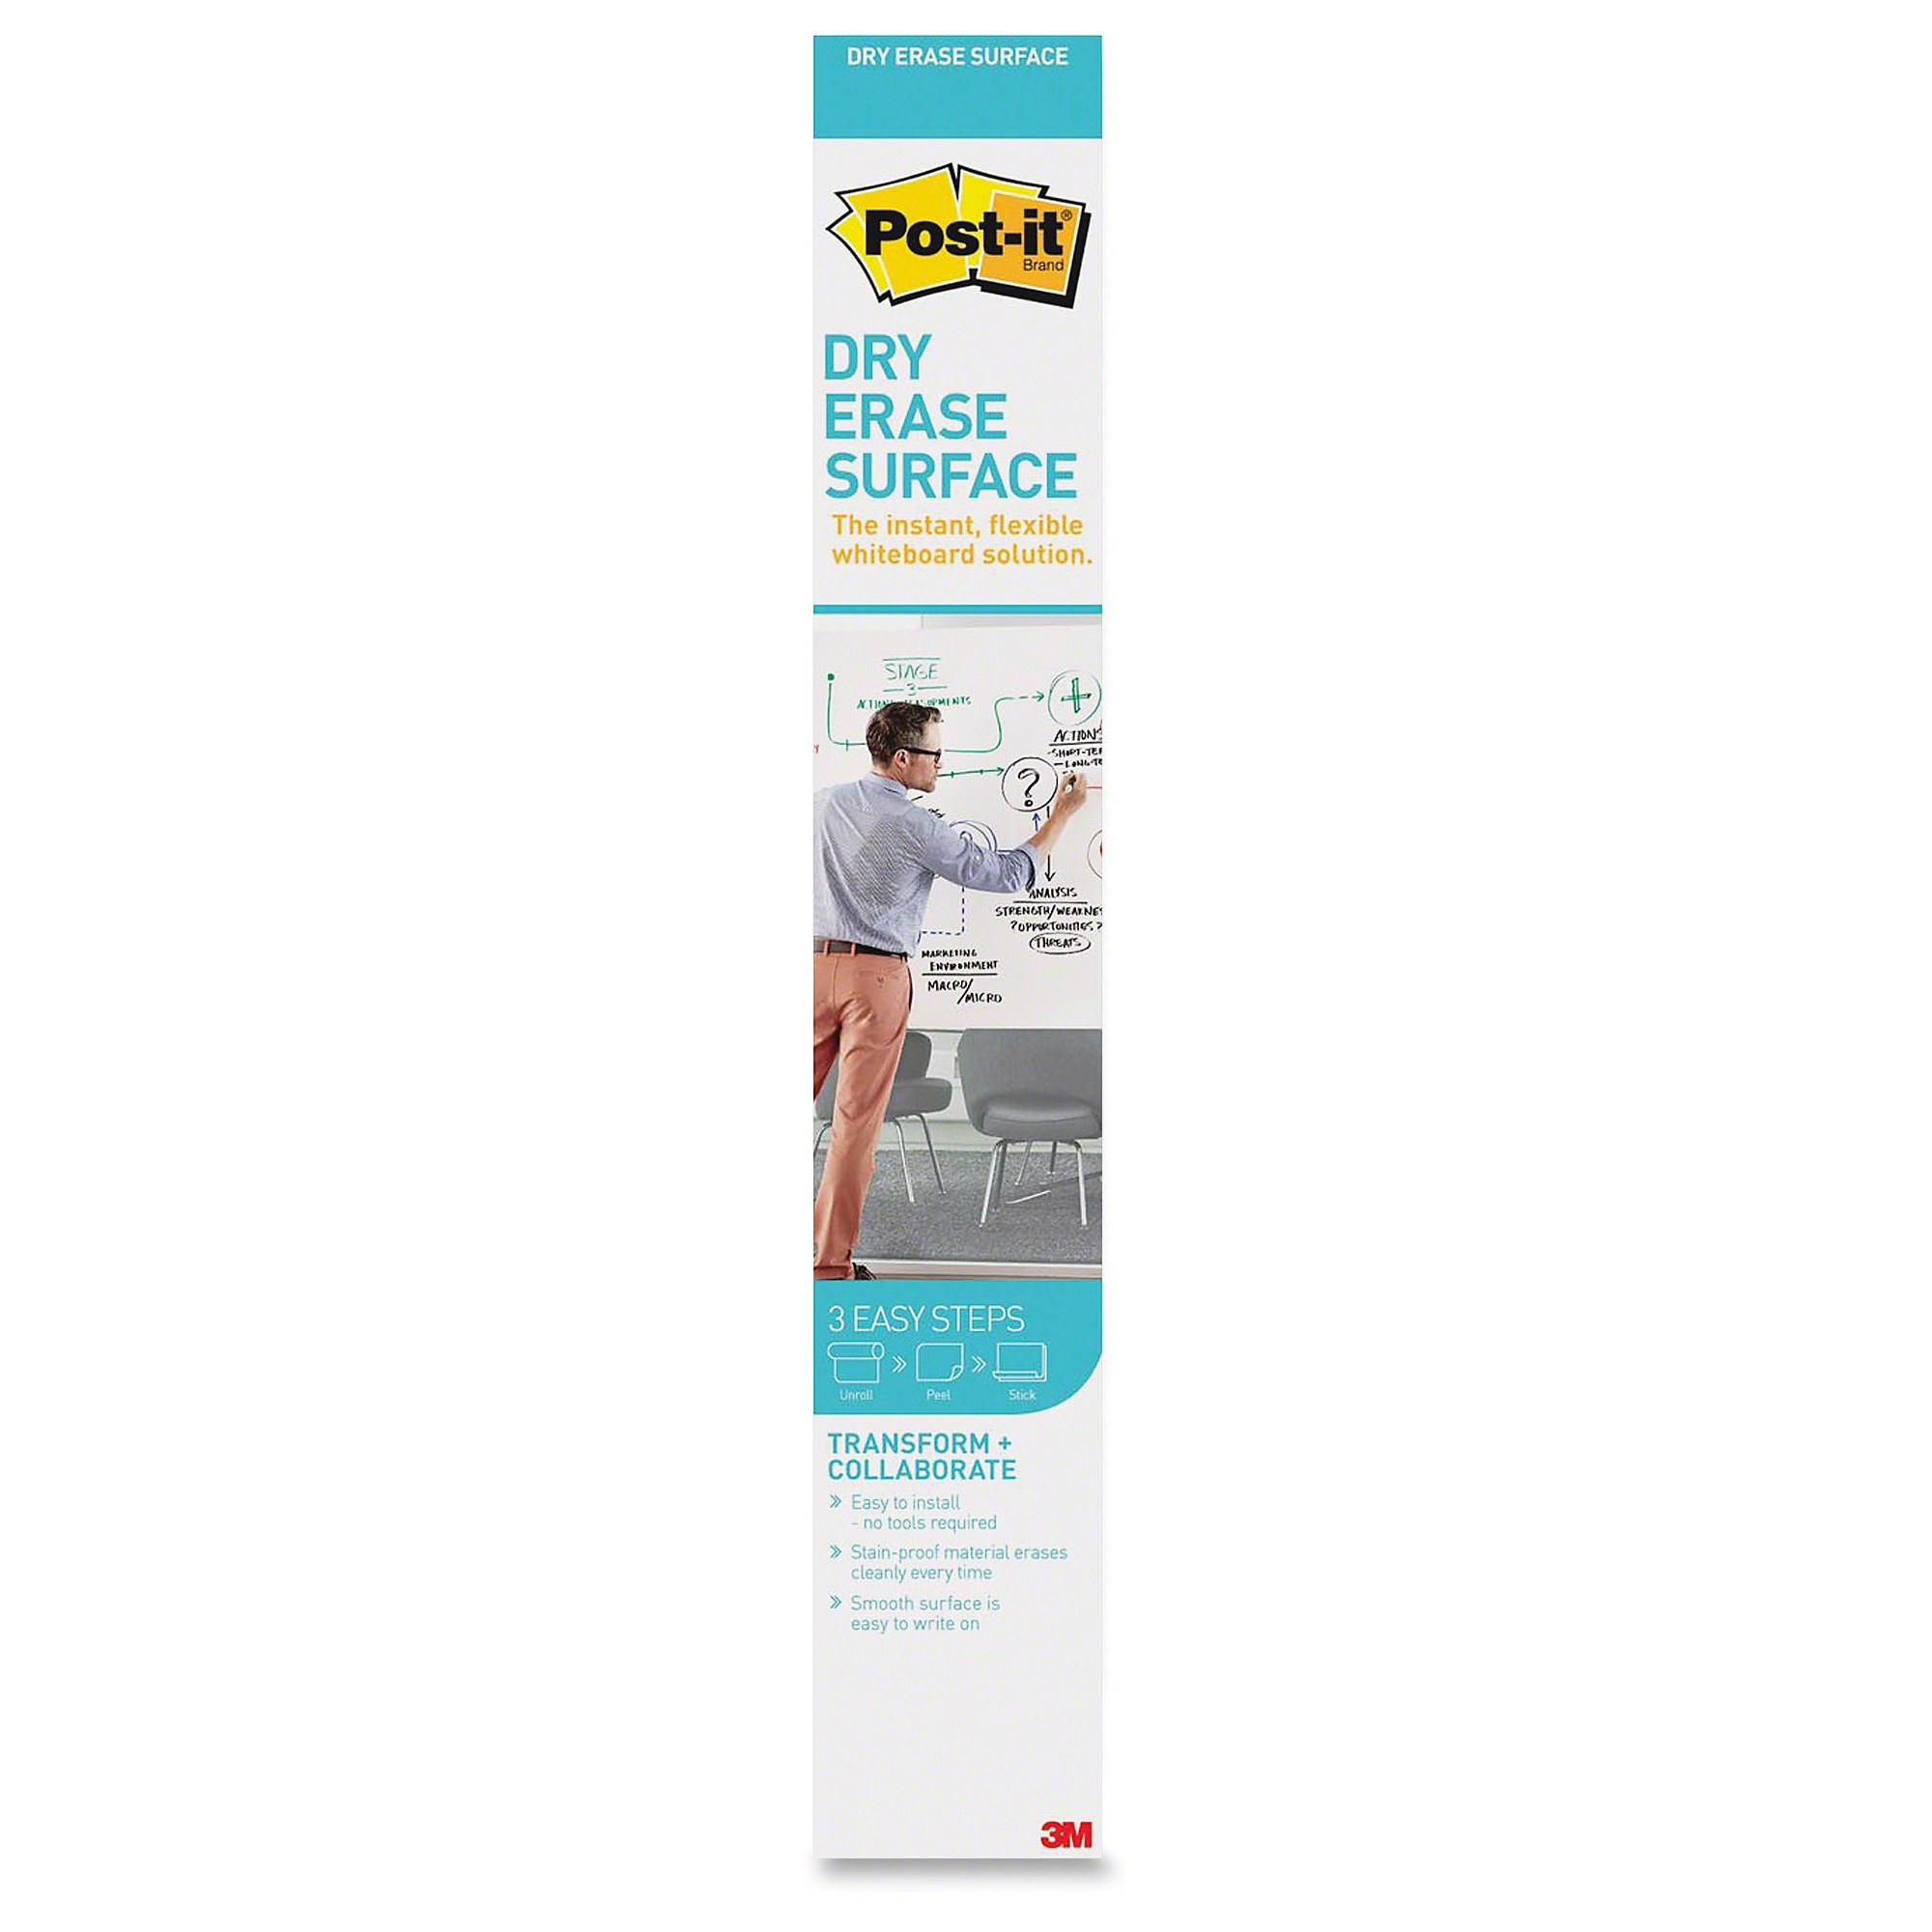 Post-it DEF3X2 Dry Erase Surface With Adhesive Backing 36 X 24 White for sale online